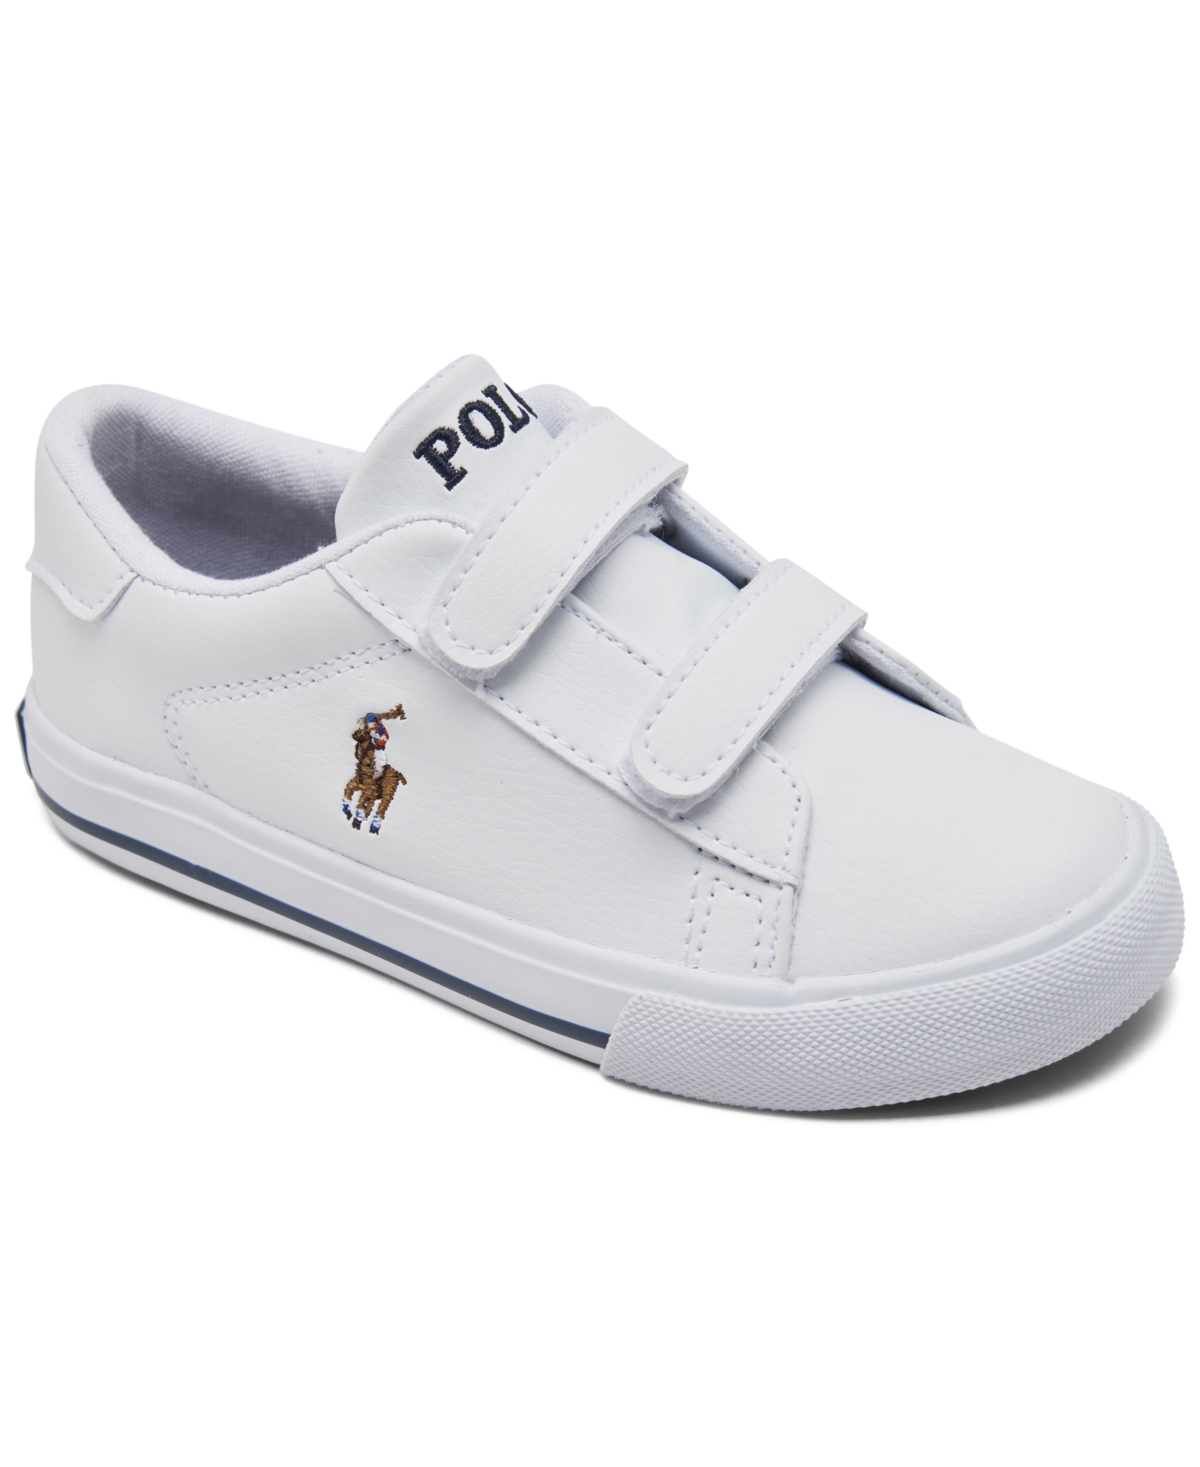 Polo Ralph Lauren Babies' Toddler Boys' Easten Ii Ez Casual Sneakers From Finish Line In White Navy